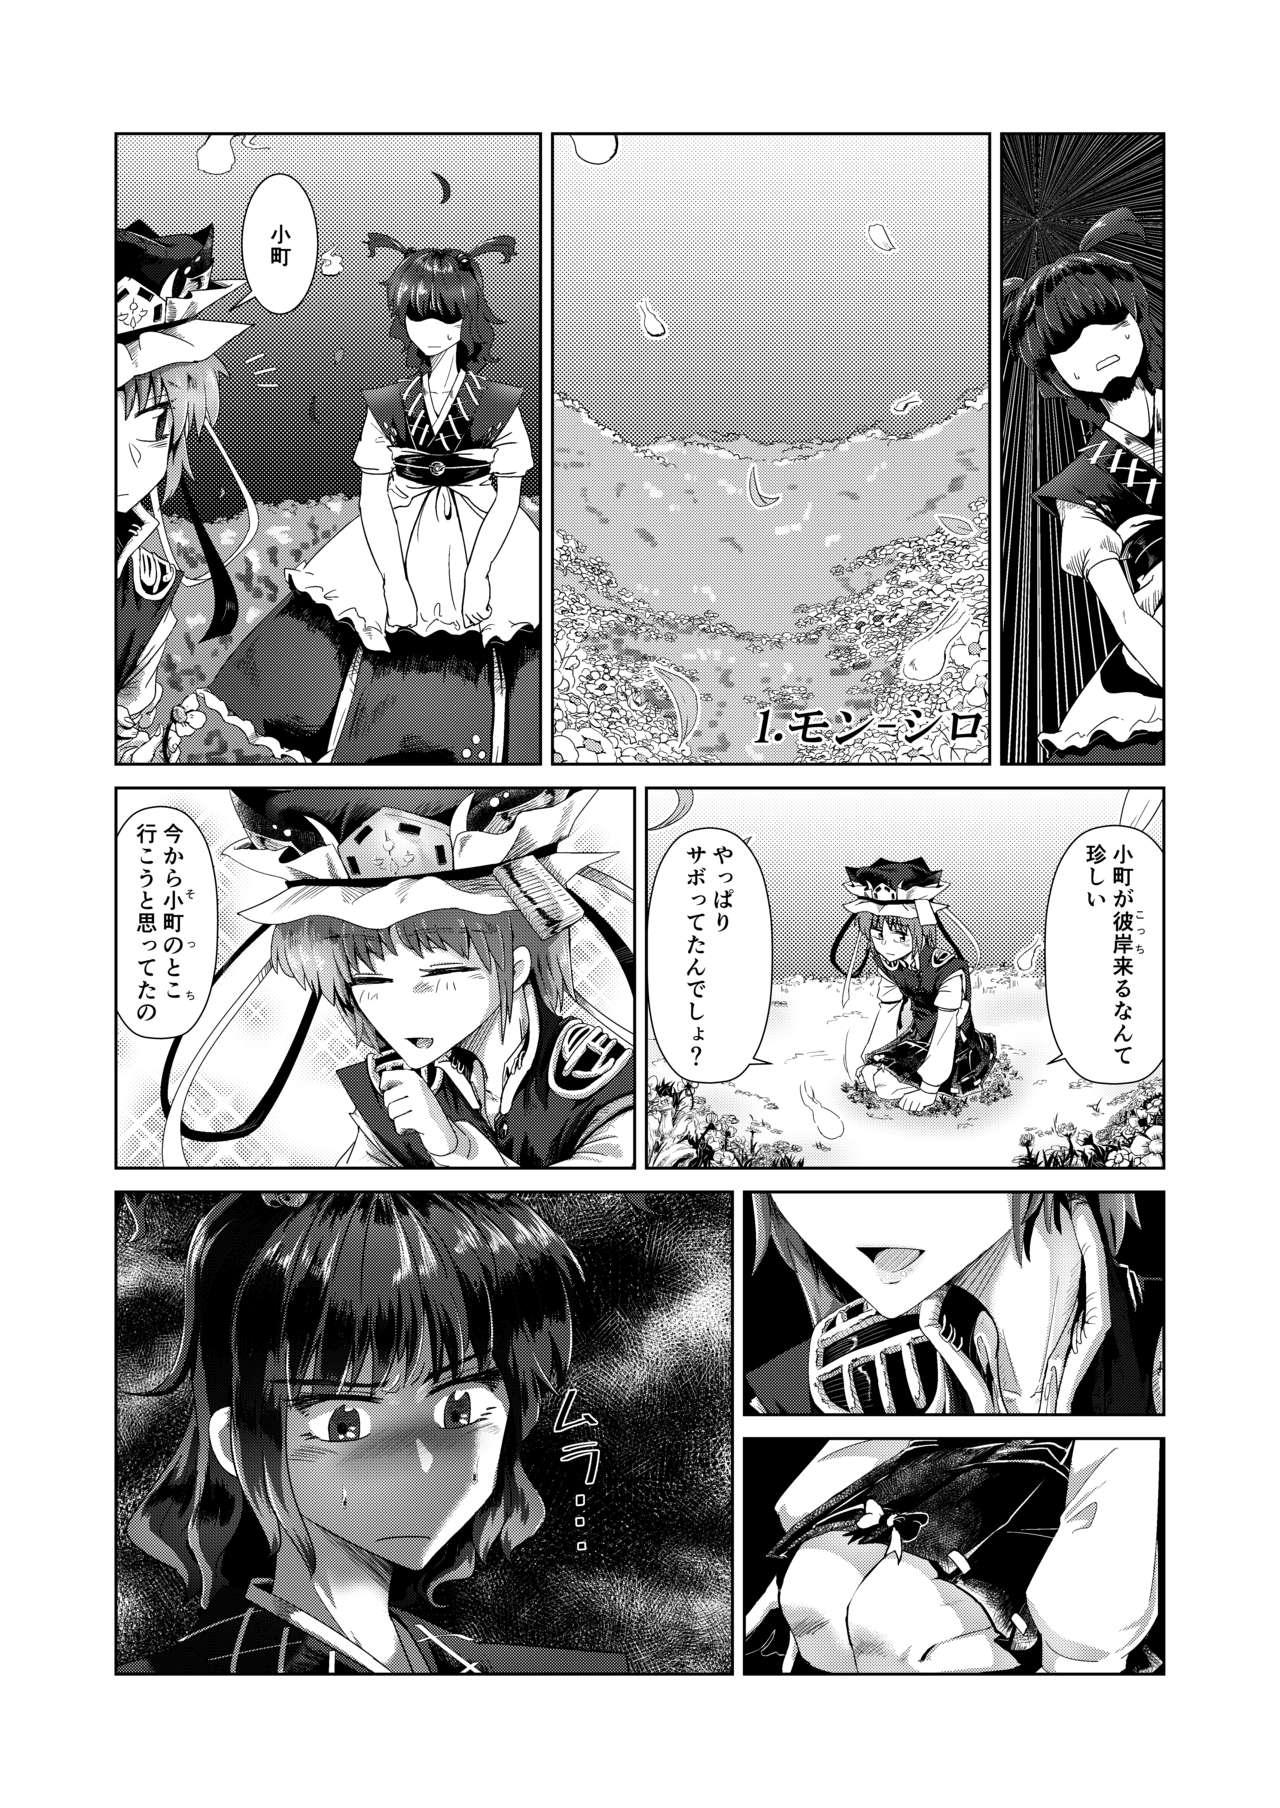 Tied 愛の輪郭 - Touhou project Nice Ass - Page 6